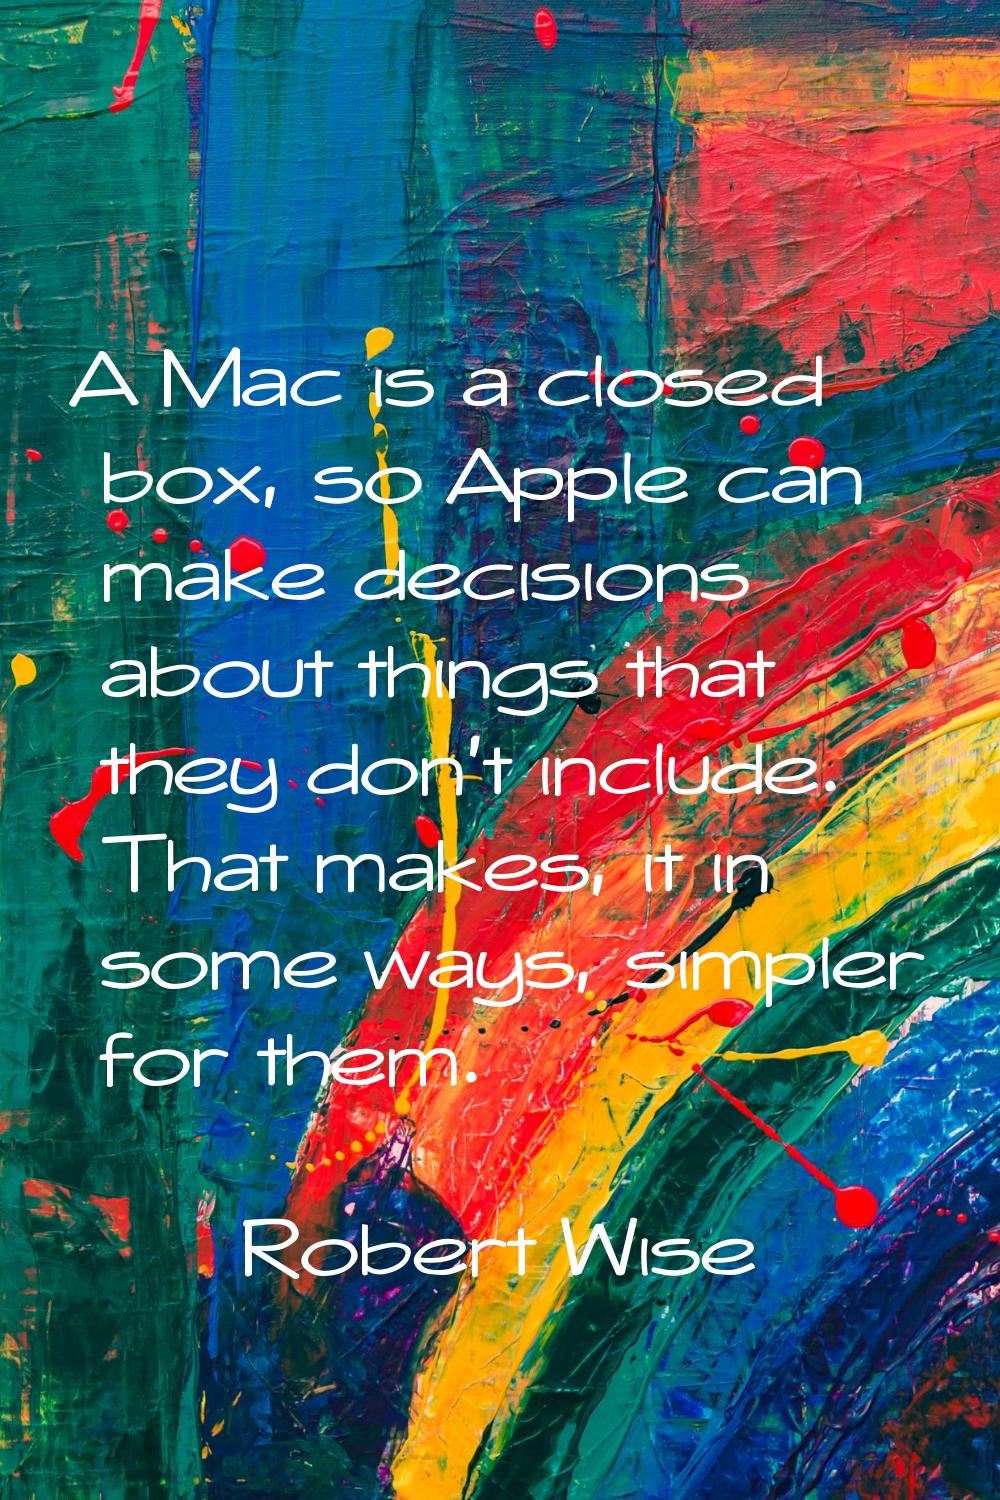 A Mac is a closed box, so Apple can make decisions about things that they don't include. That makes